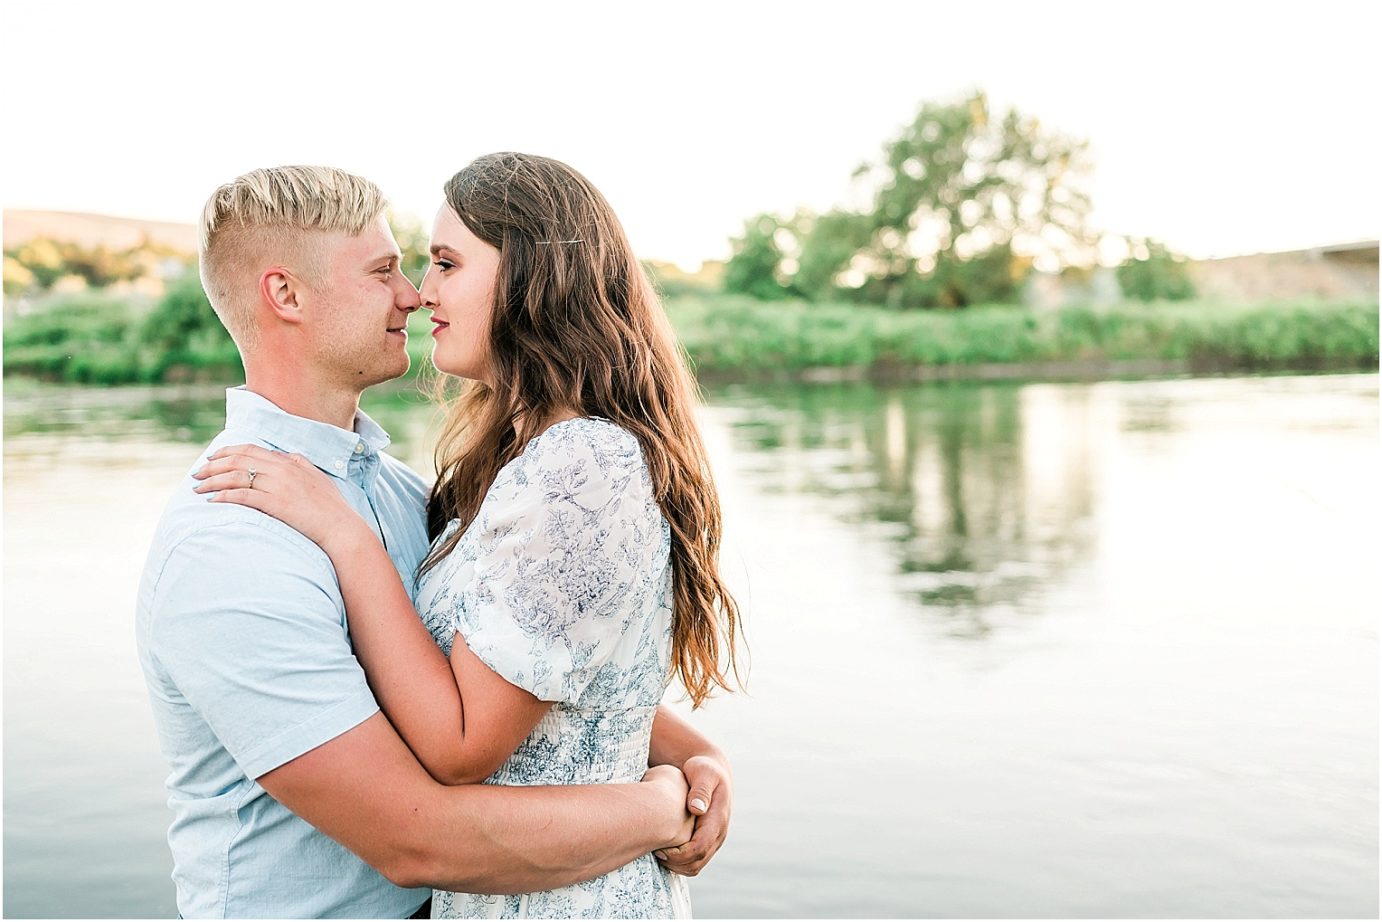 richland engagement session richland photographer Nate and Jacqueline standing by the river